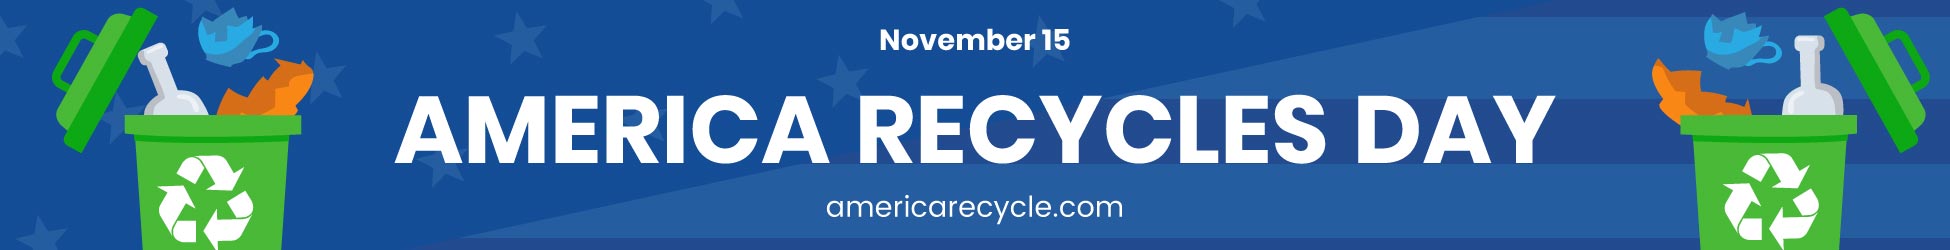 America Recycles Day Website Banner